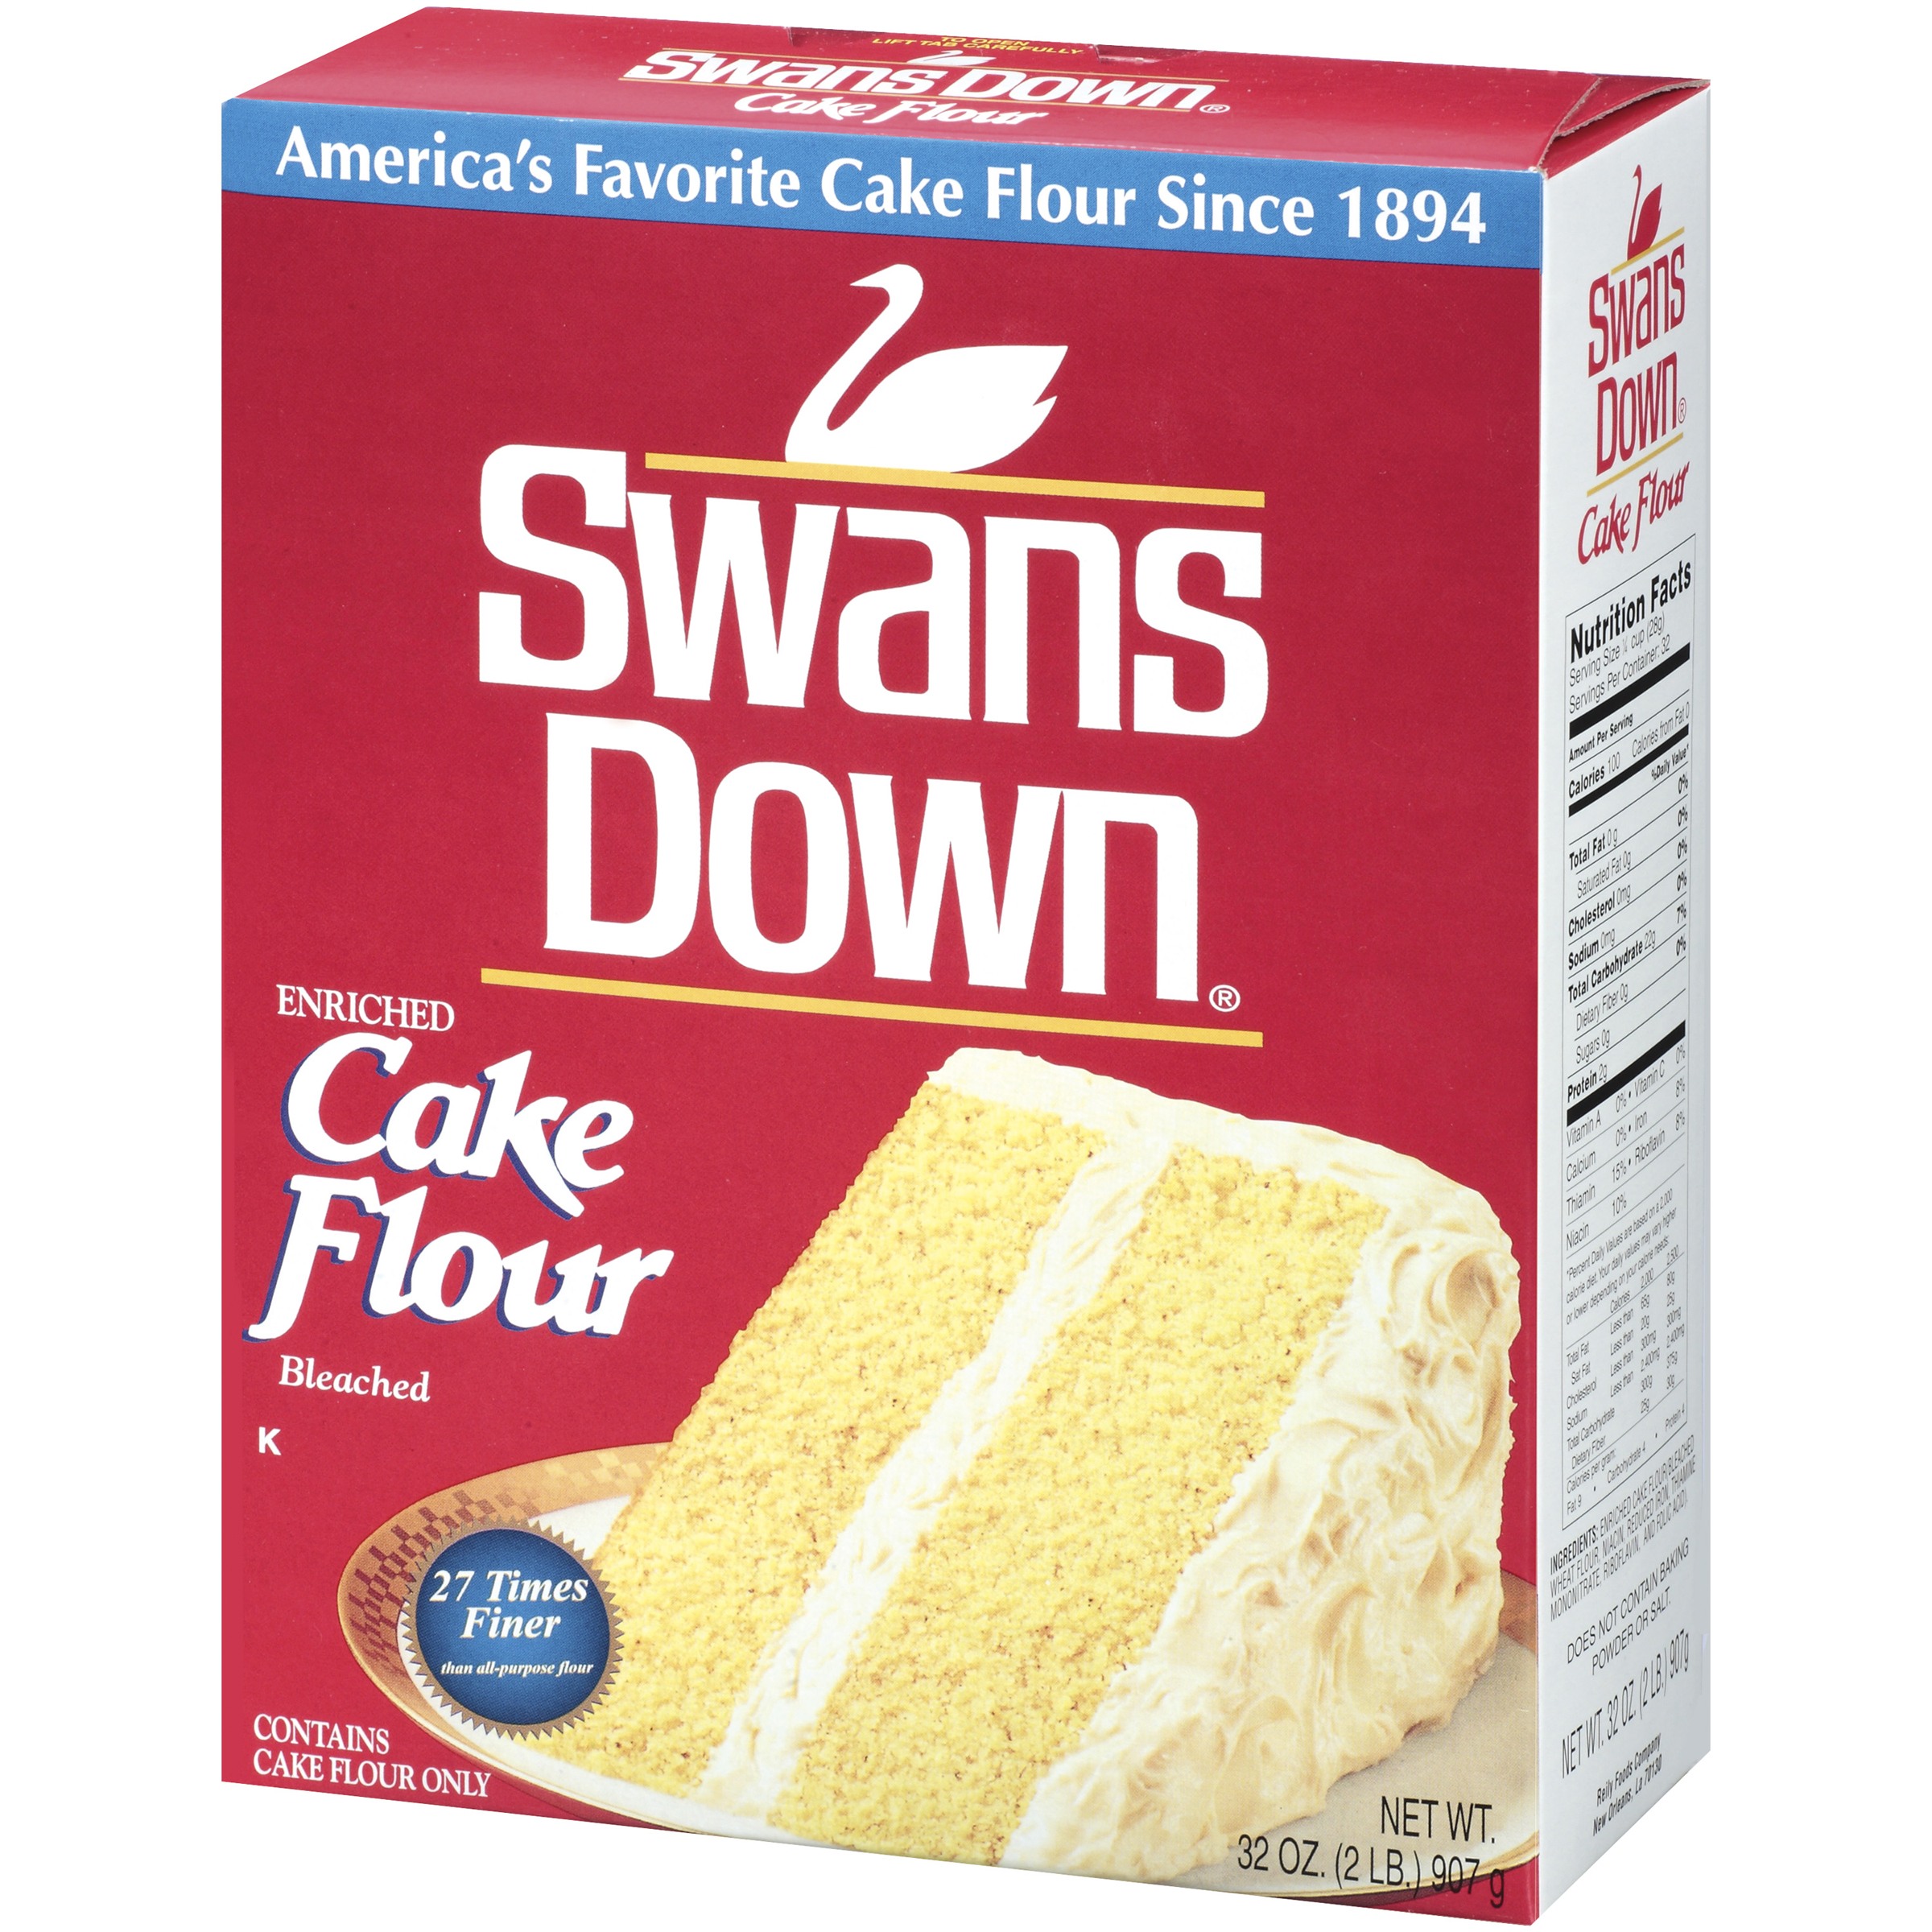 Swans Down Cake Flour, Enriched and Bleached, 32 oz Box - image 1 of 3